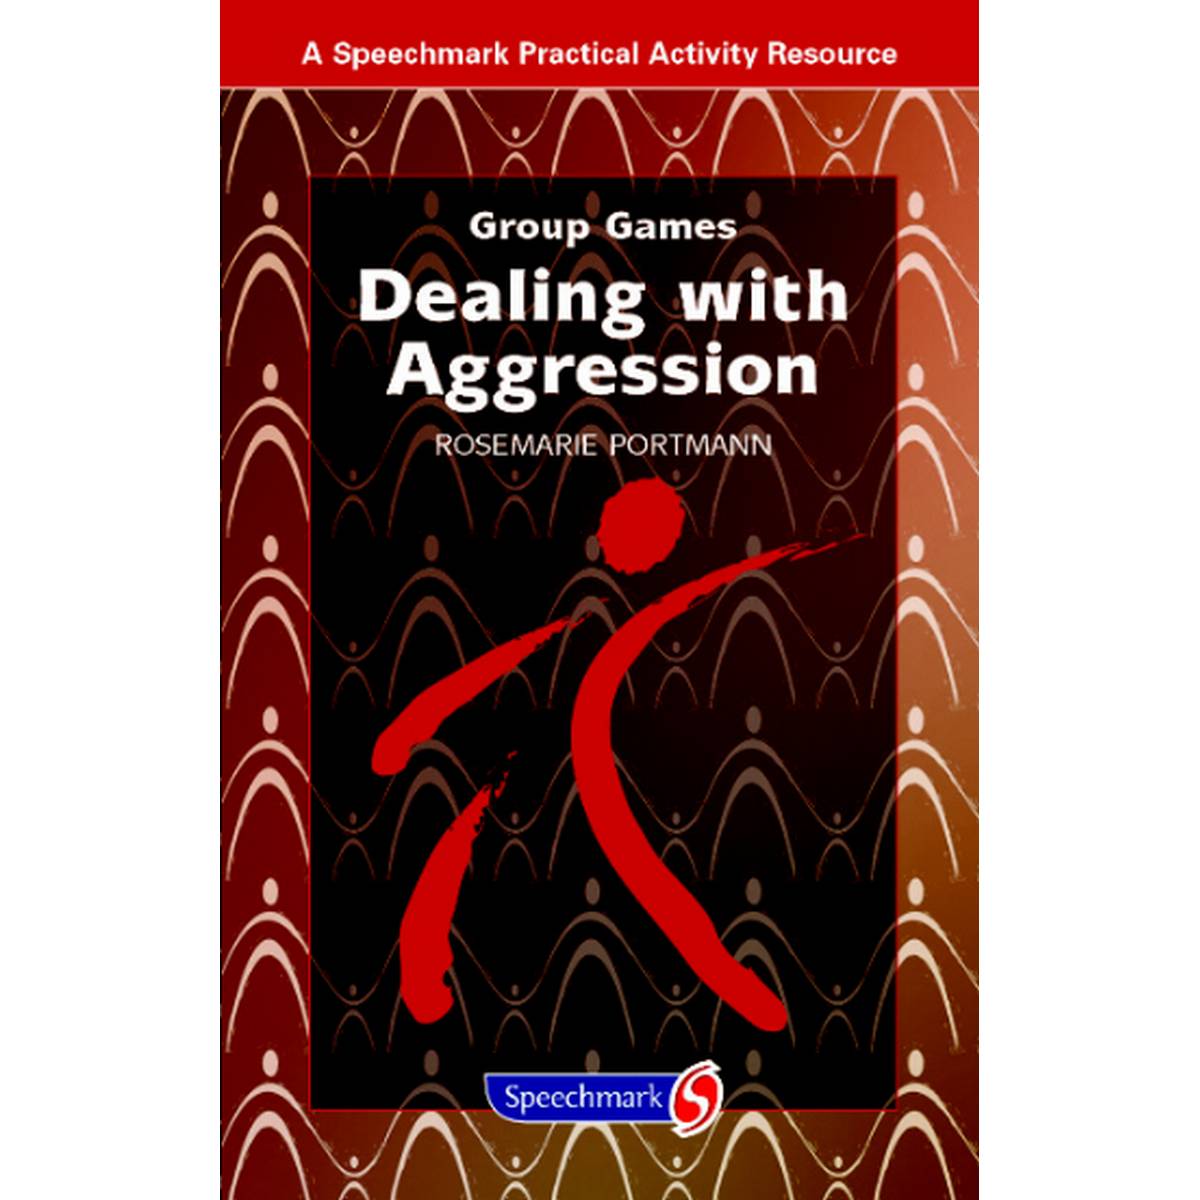 Group Games: Dealing with Aggression